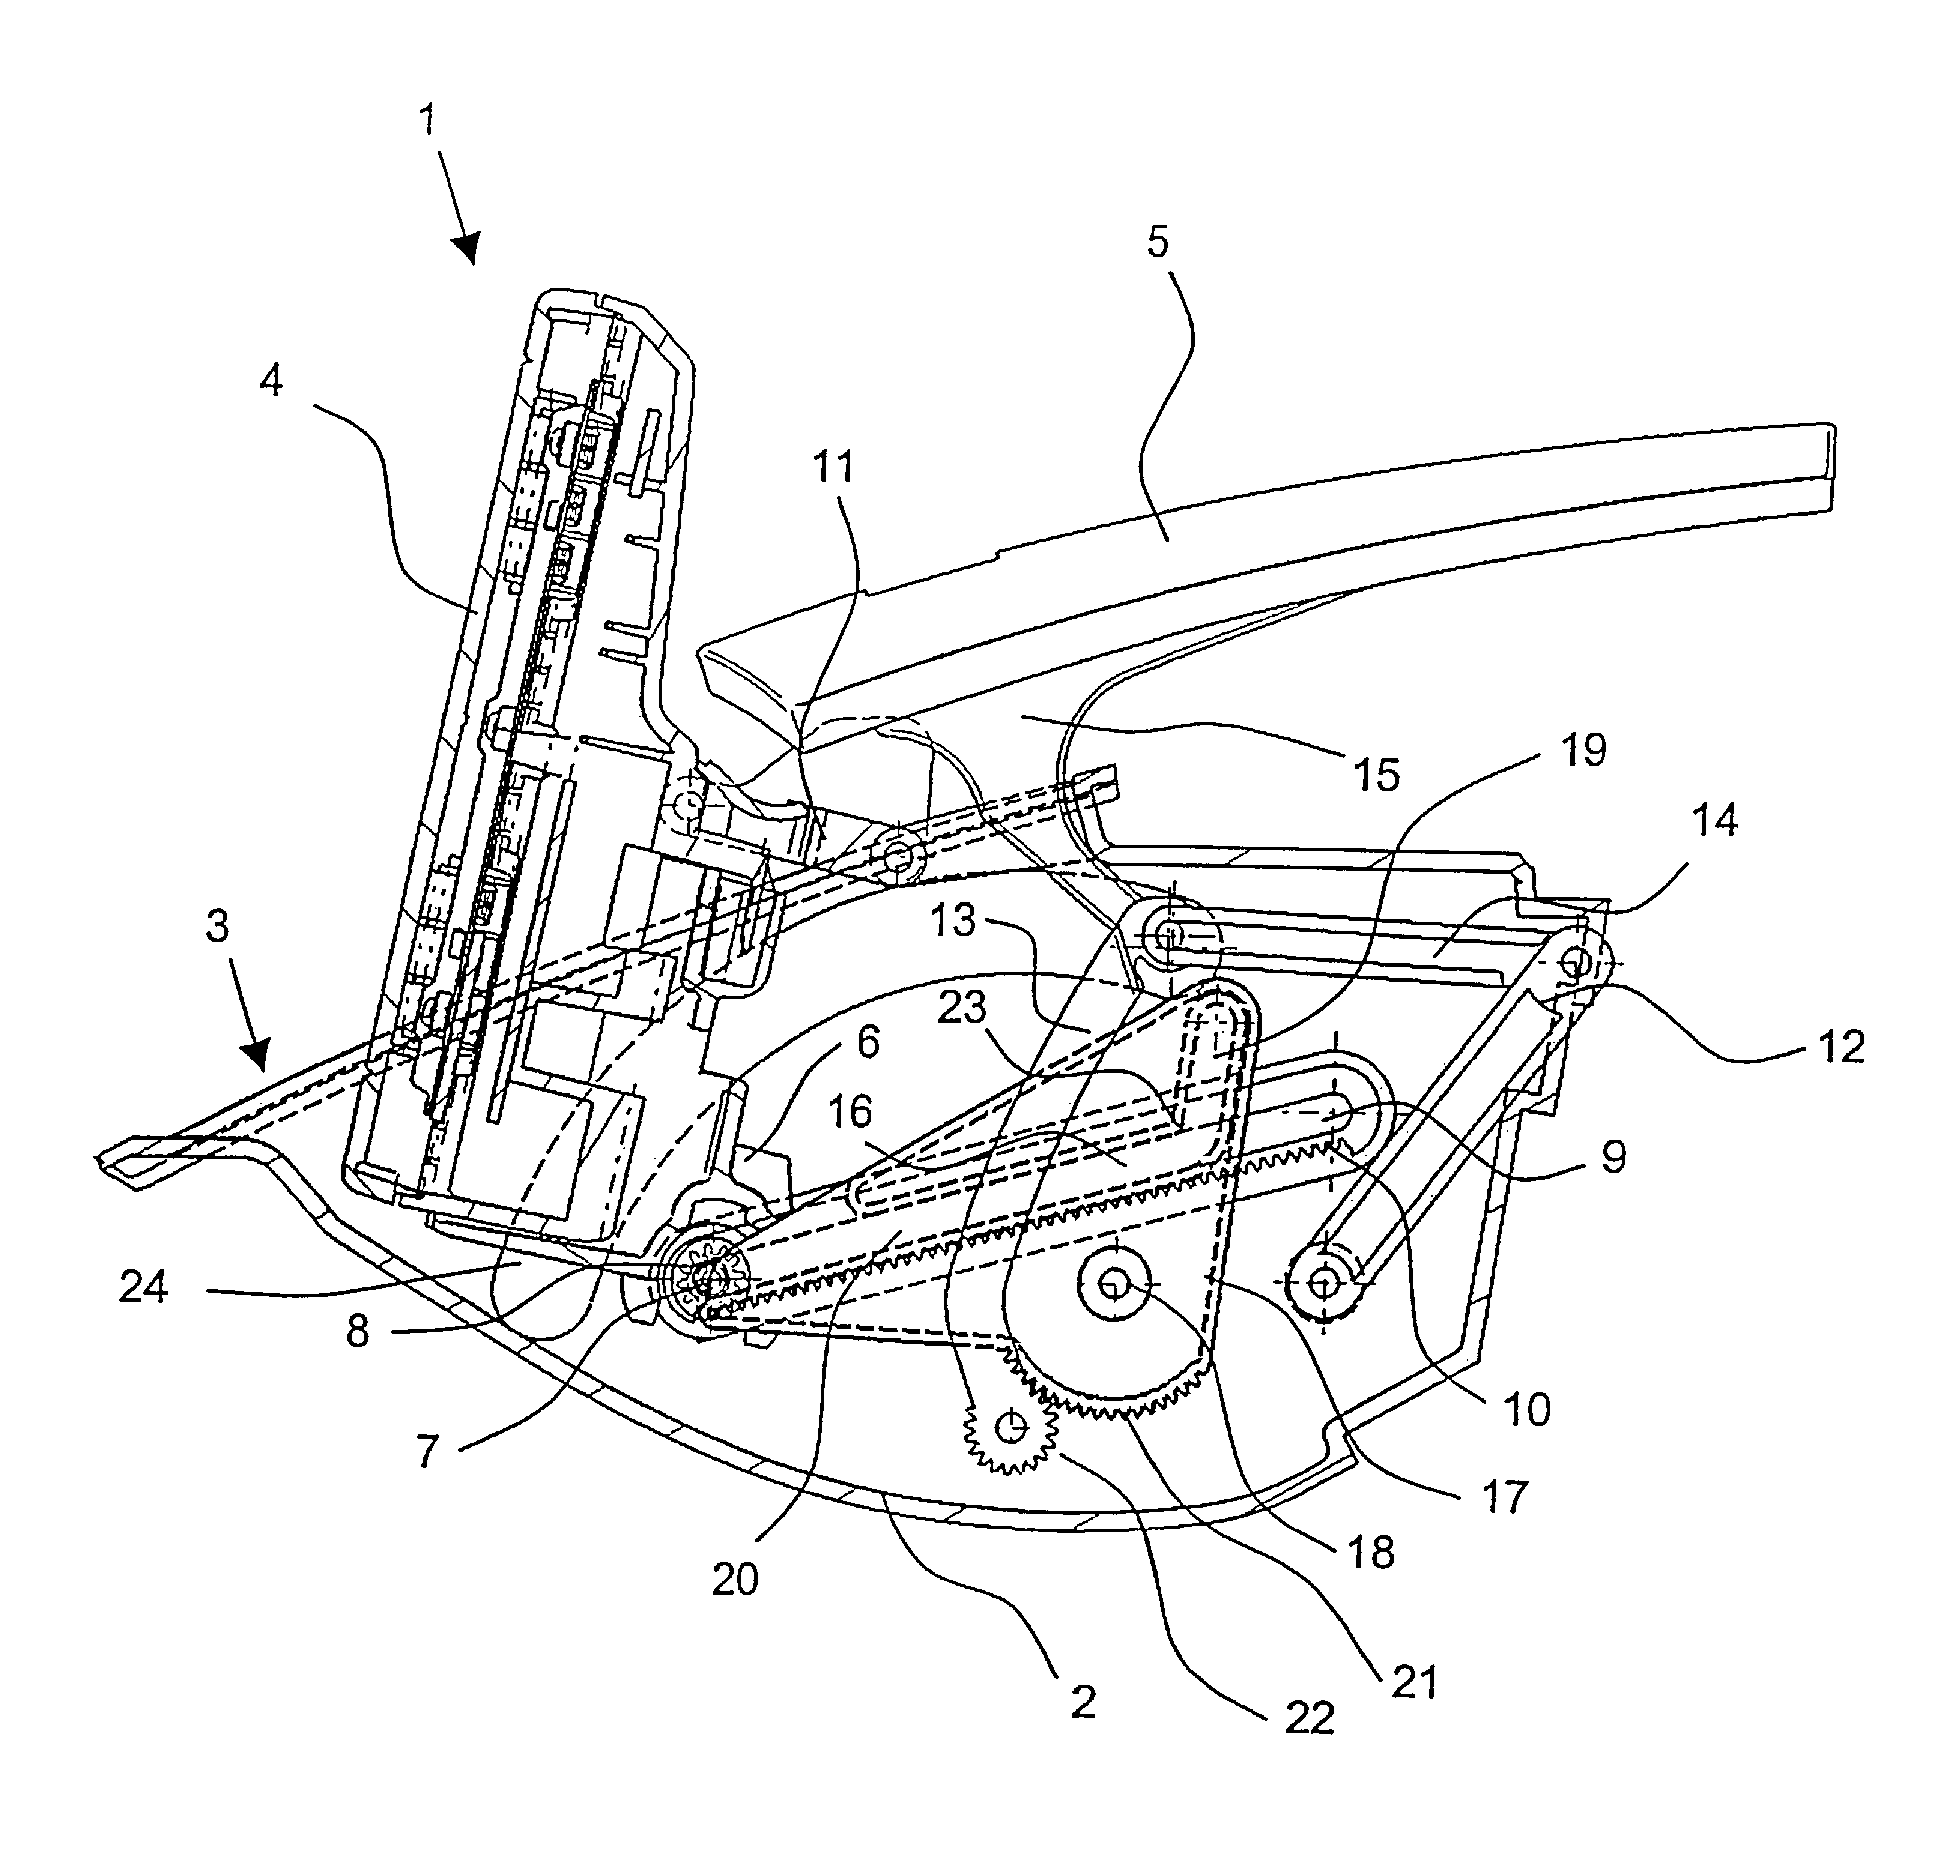 Device for movable support of an input/output unit